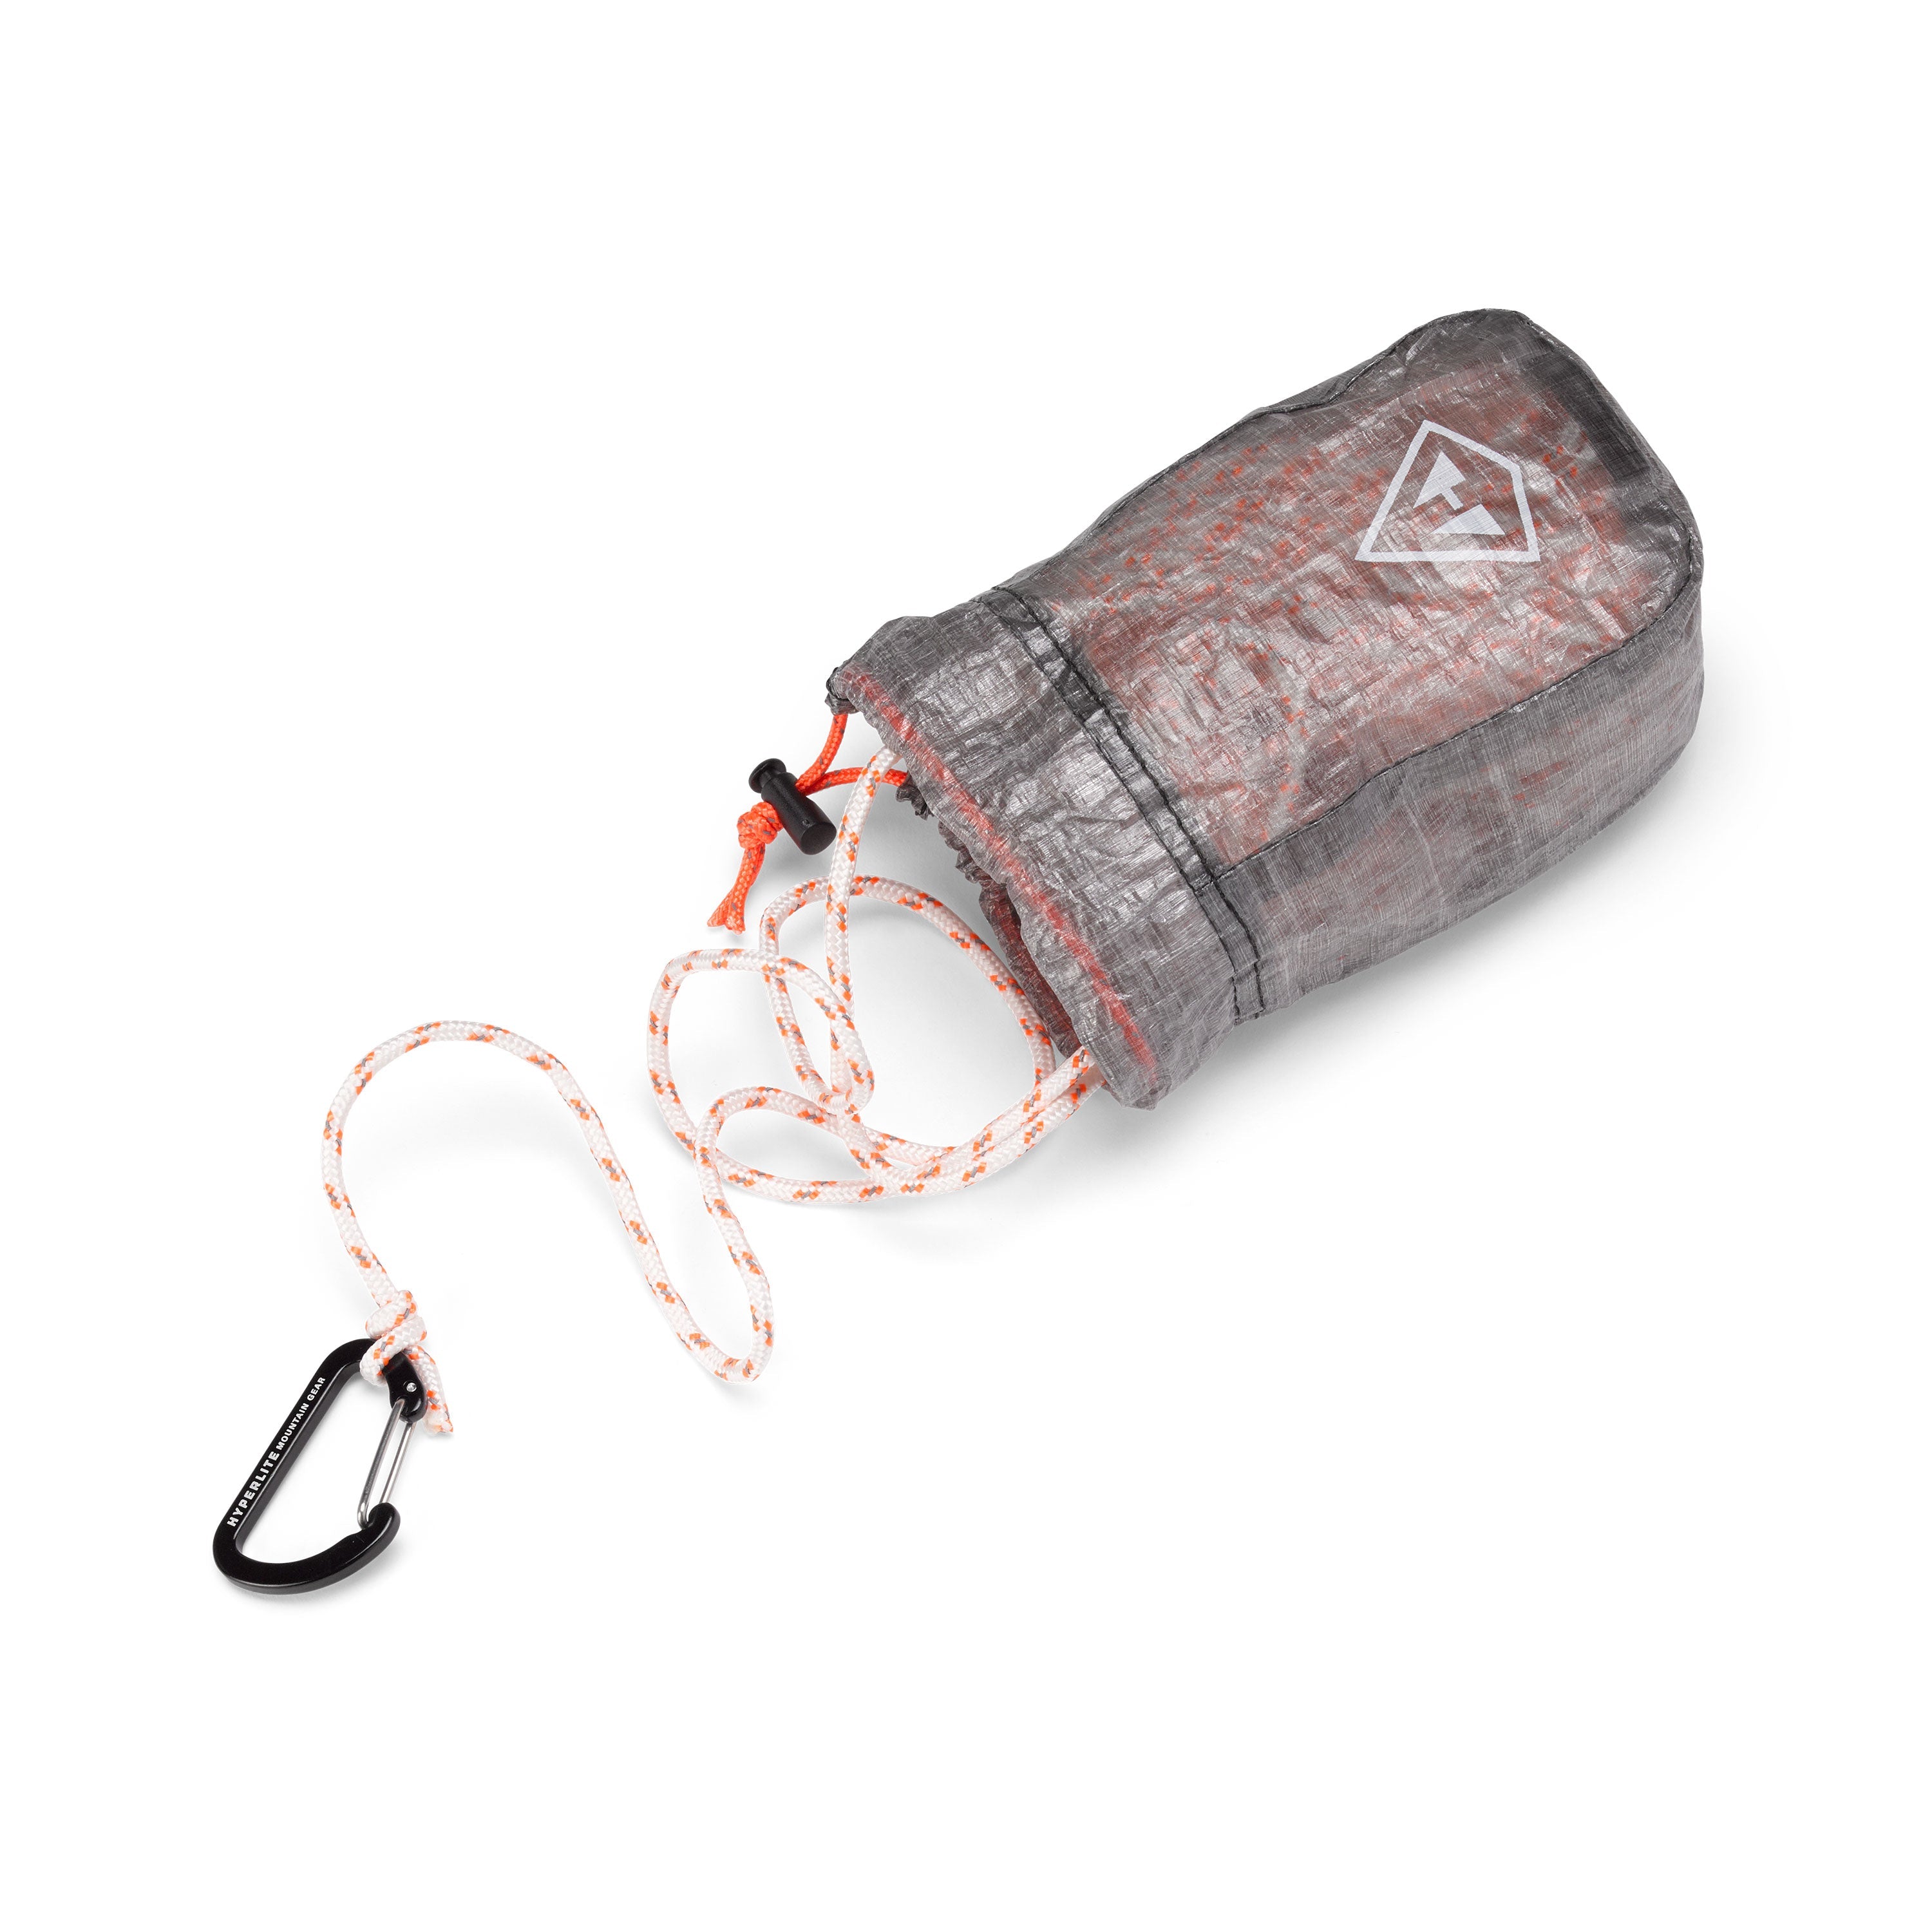 Hyperlite Mountain Gear Rock Bag Kit with mini carabiner and Lawson bearline unfurling from the bag